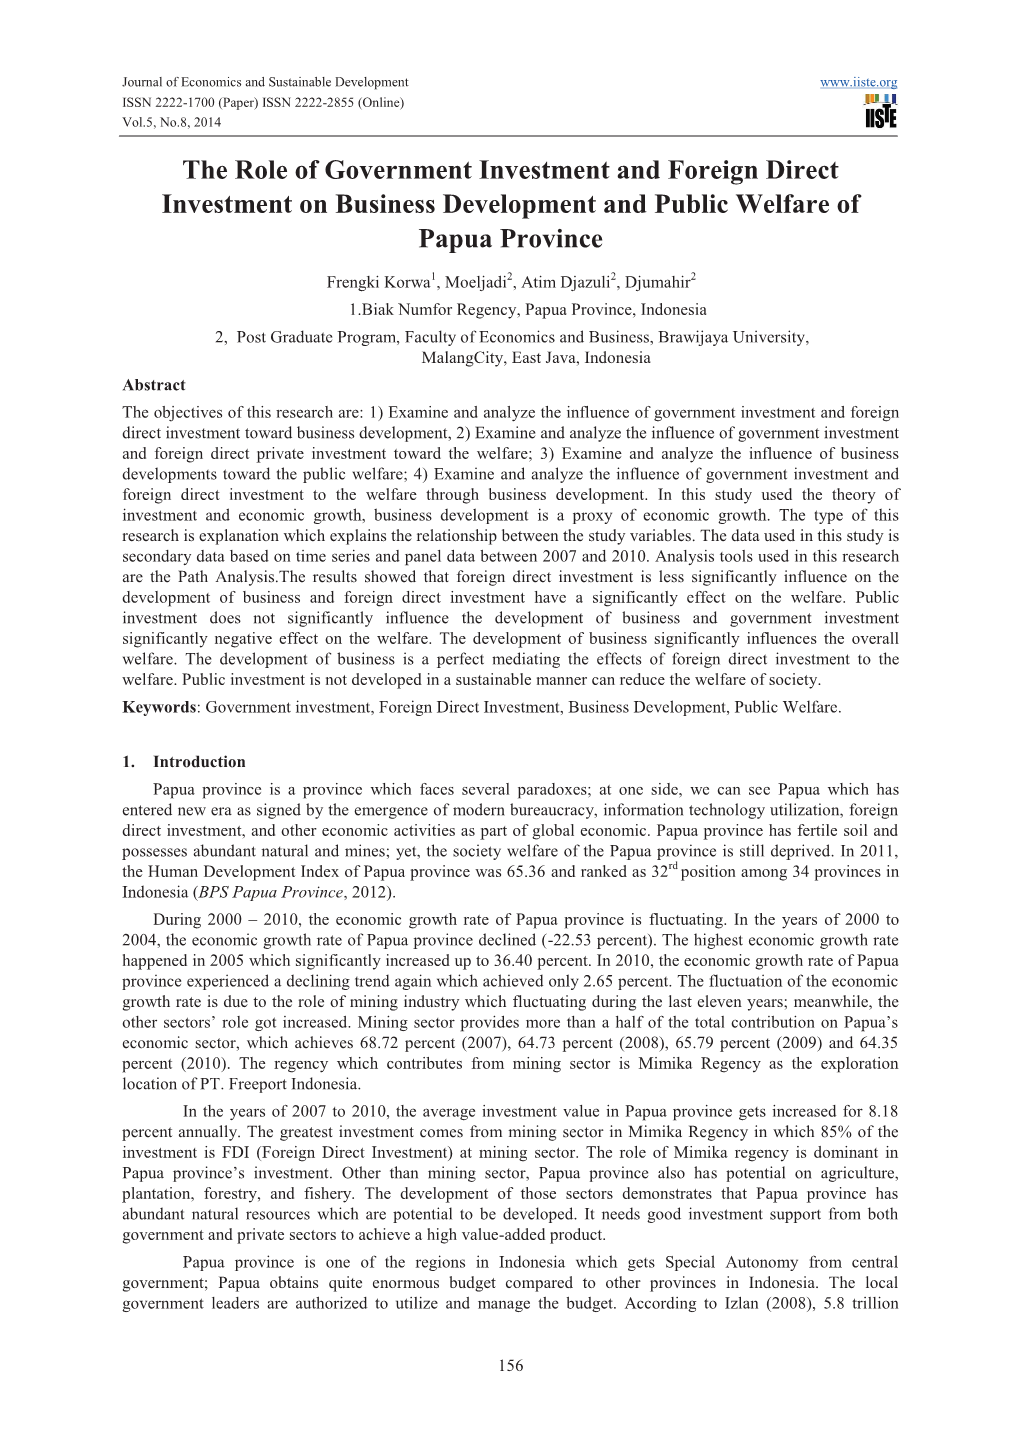 The Role of Government Investment and Foreign Direct Investment on Business Development and Public Welfare of Papua Province